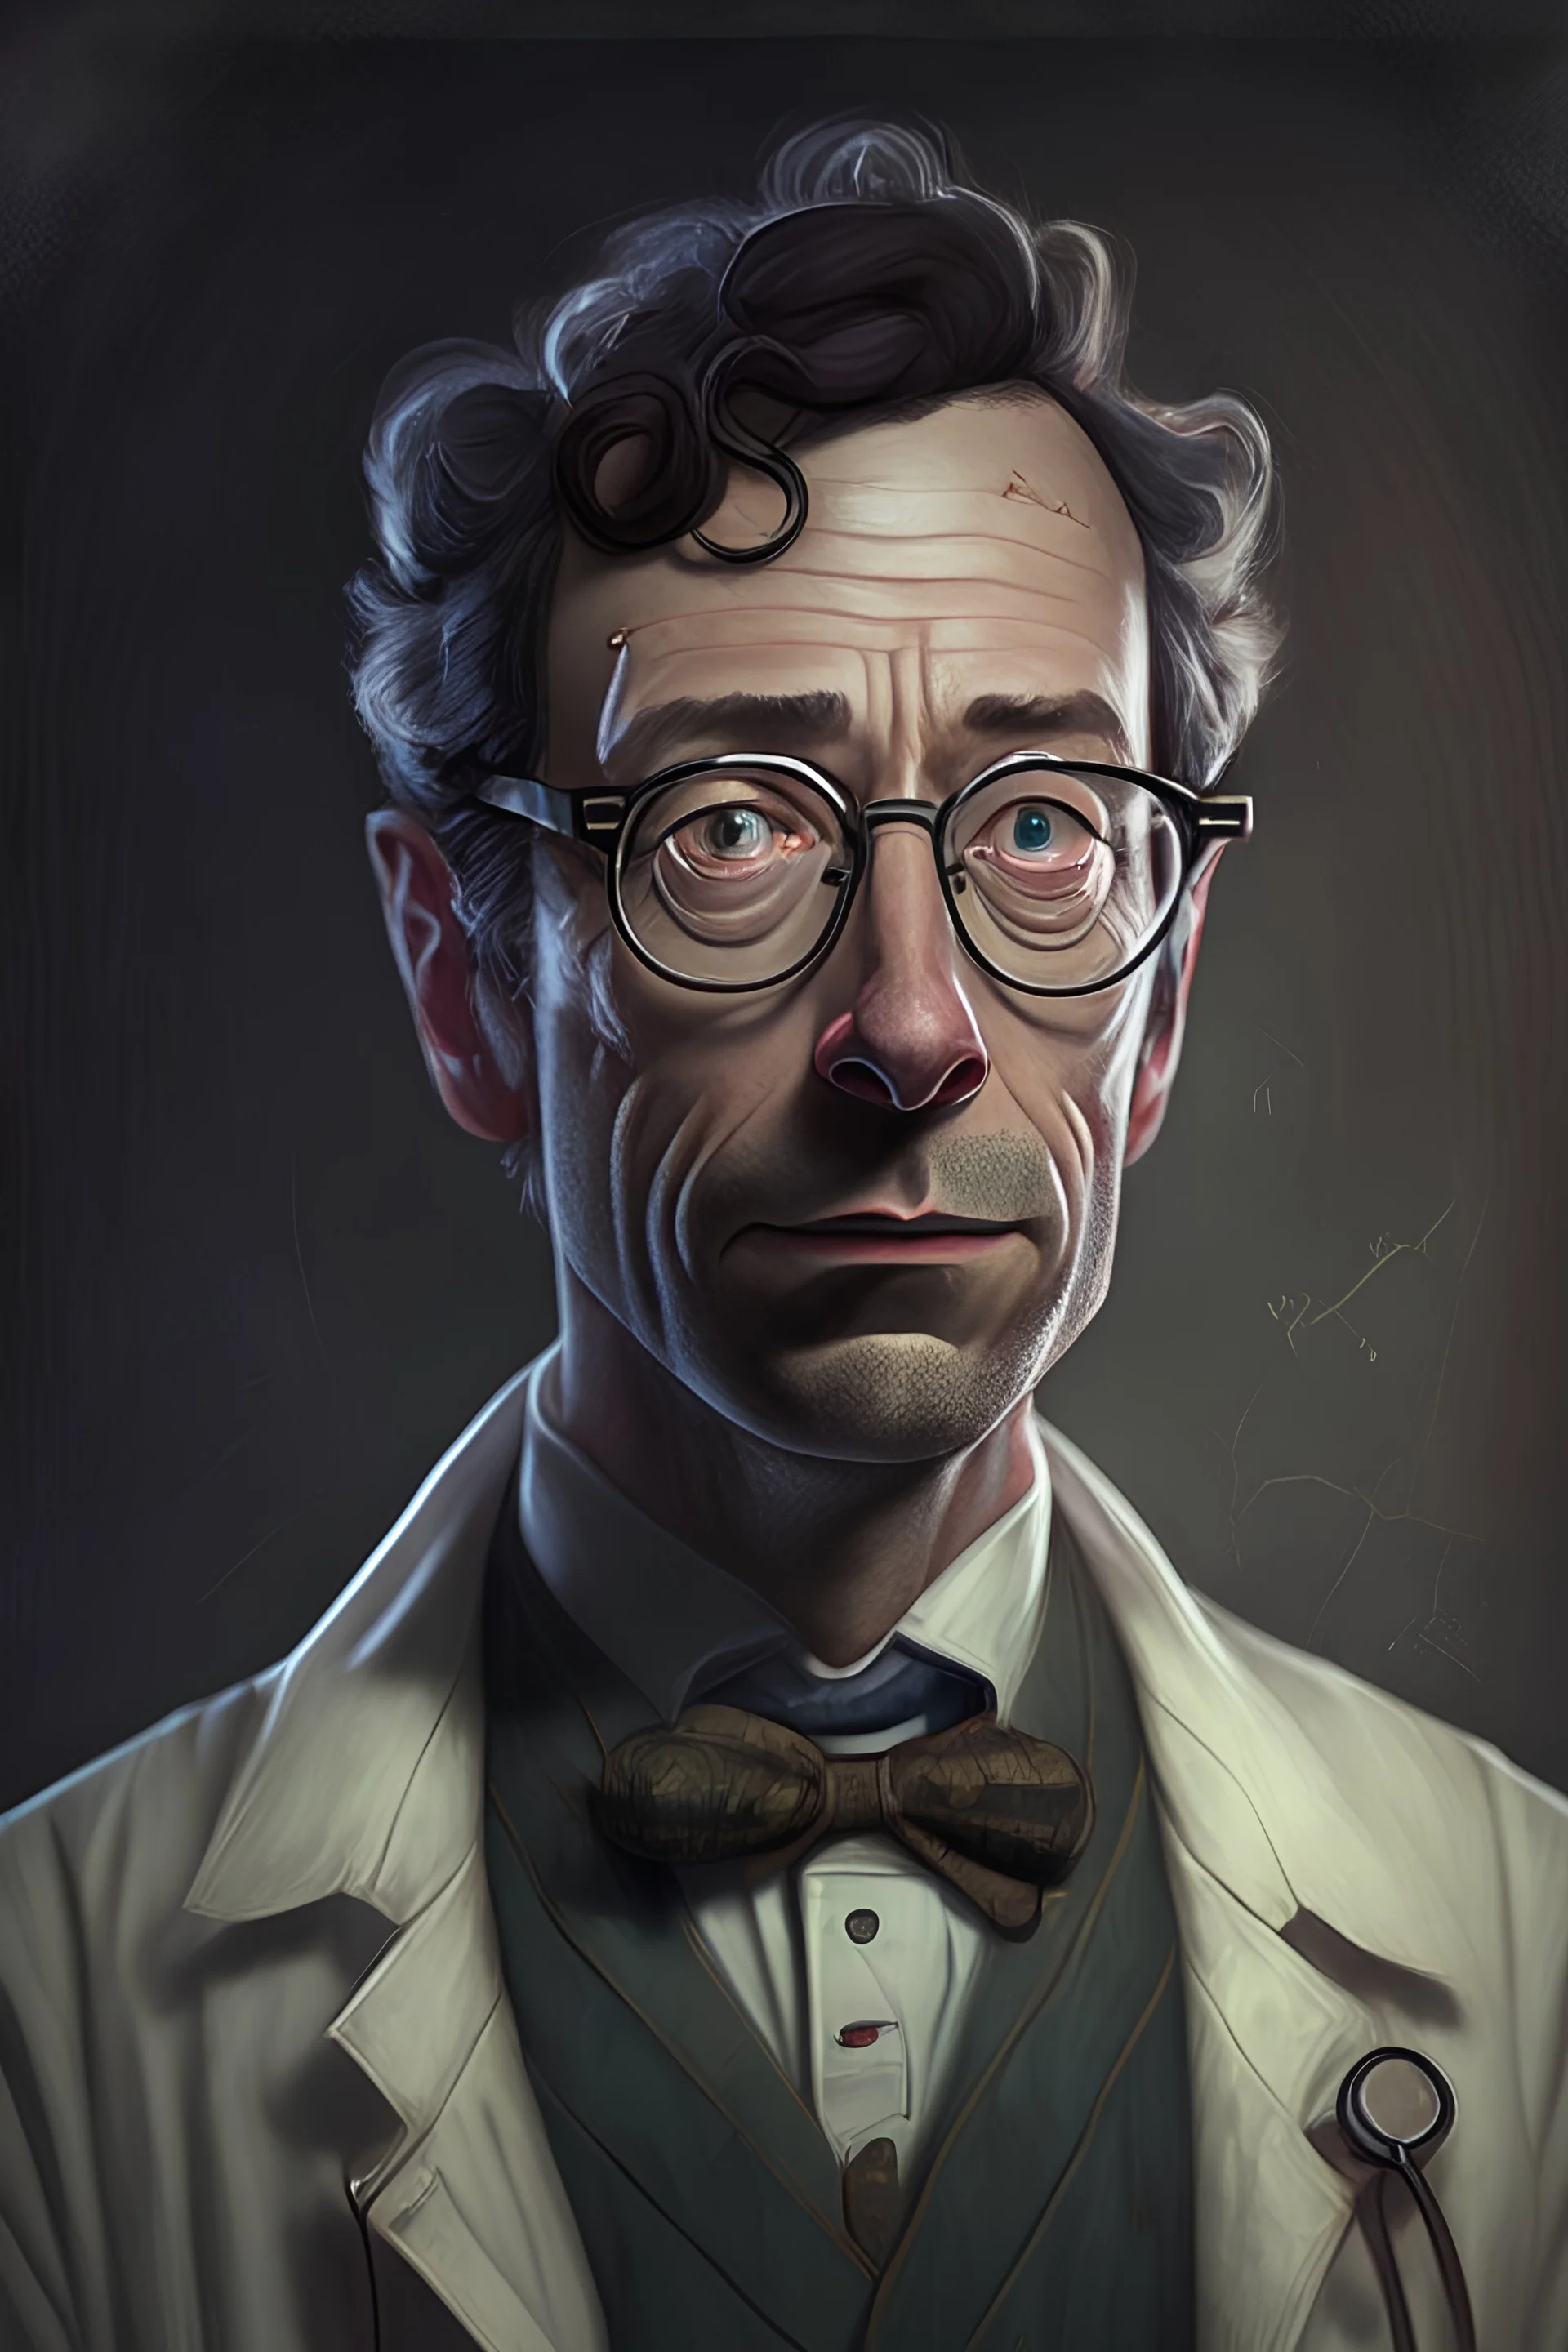 Portrait of Dr. Marcus Black - The brilliant but socially awkward scientist